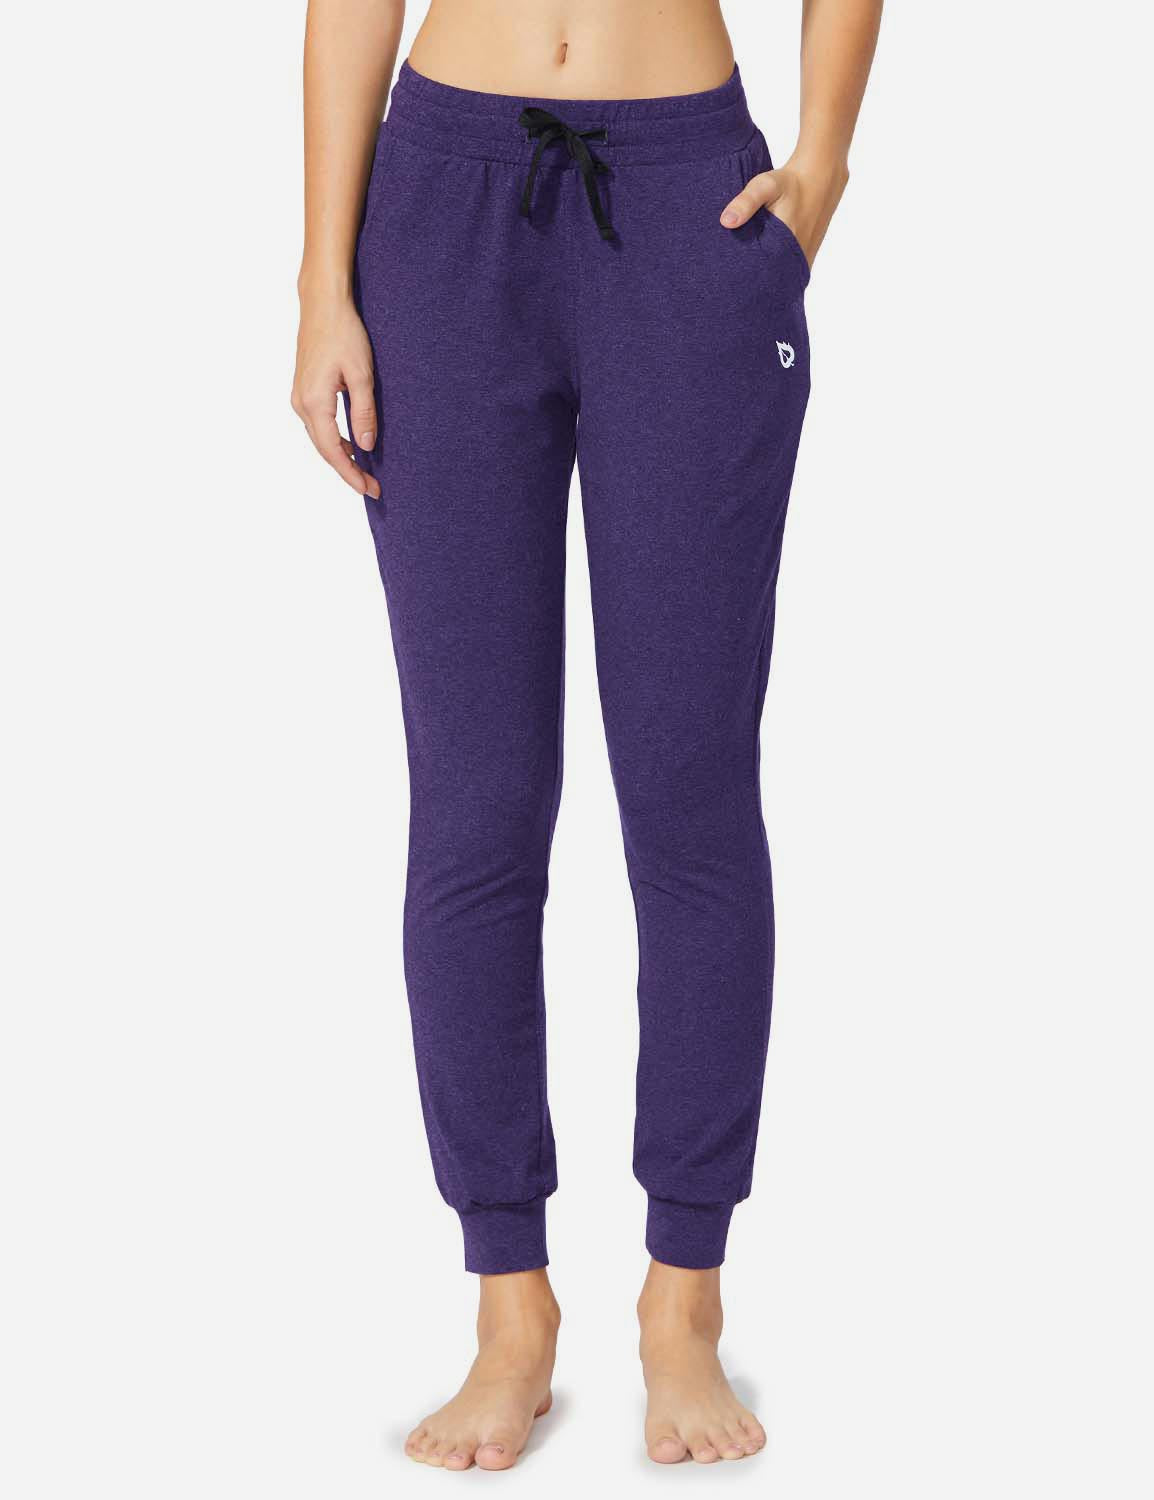 Baleaf Women's Cotton Comfy Pocketed & Tapered Weekend Joggers abh103 Purple Heather Front